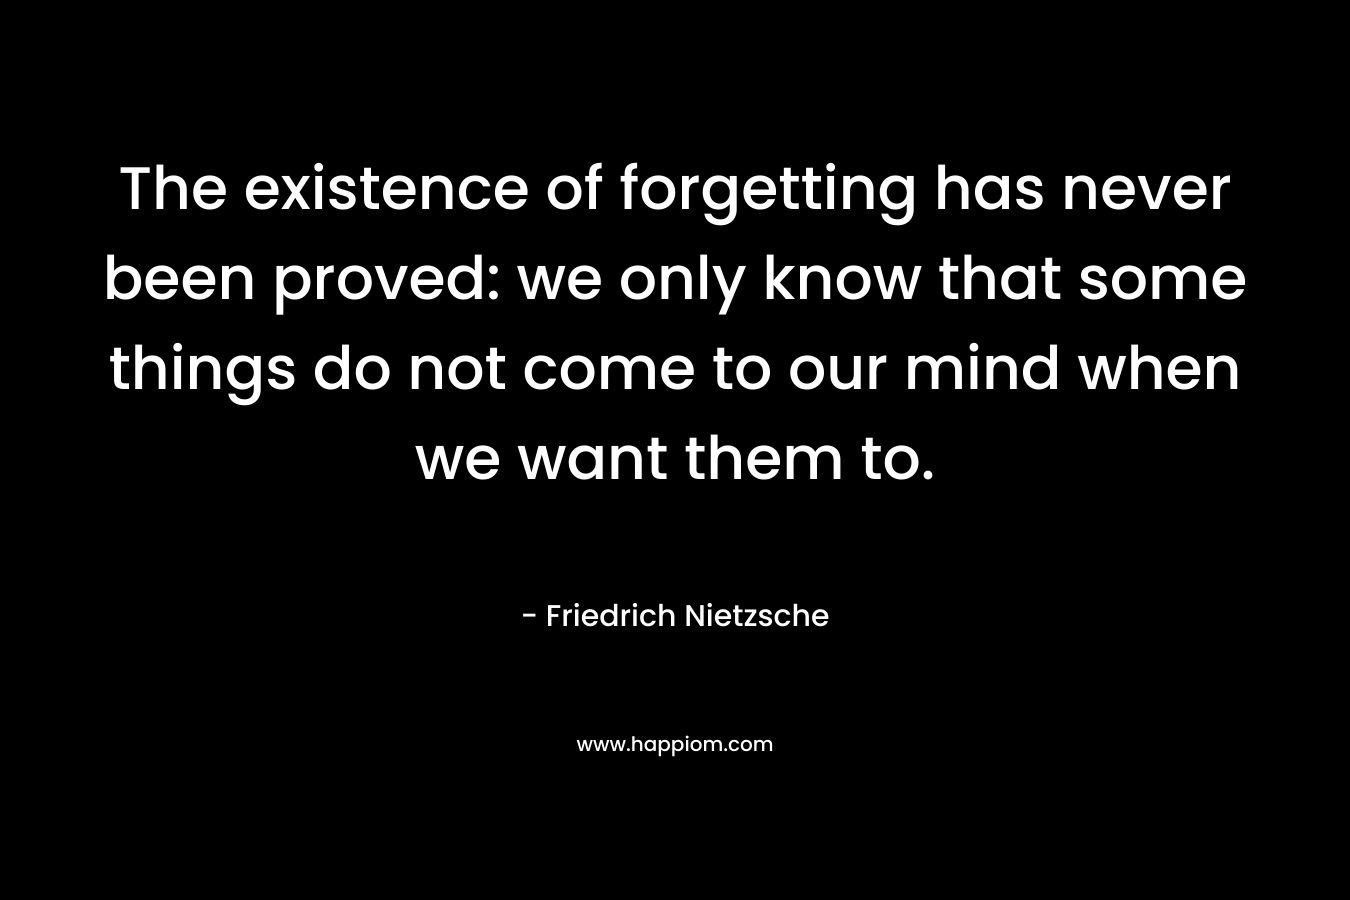 The existence of forgetting has never been proved: we only know that some things do not come to our mind when we want them to.